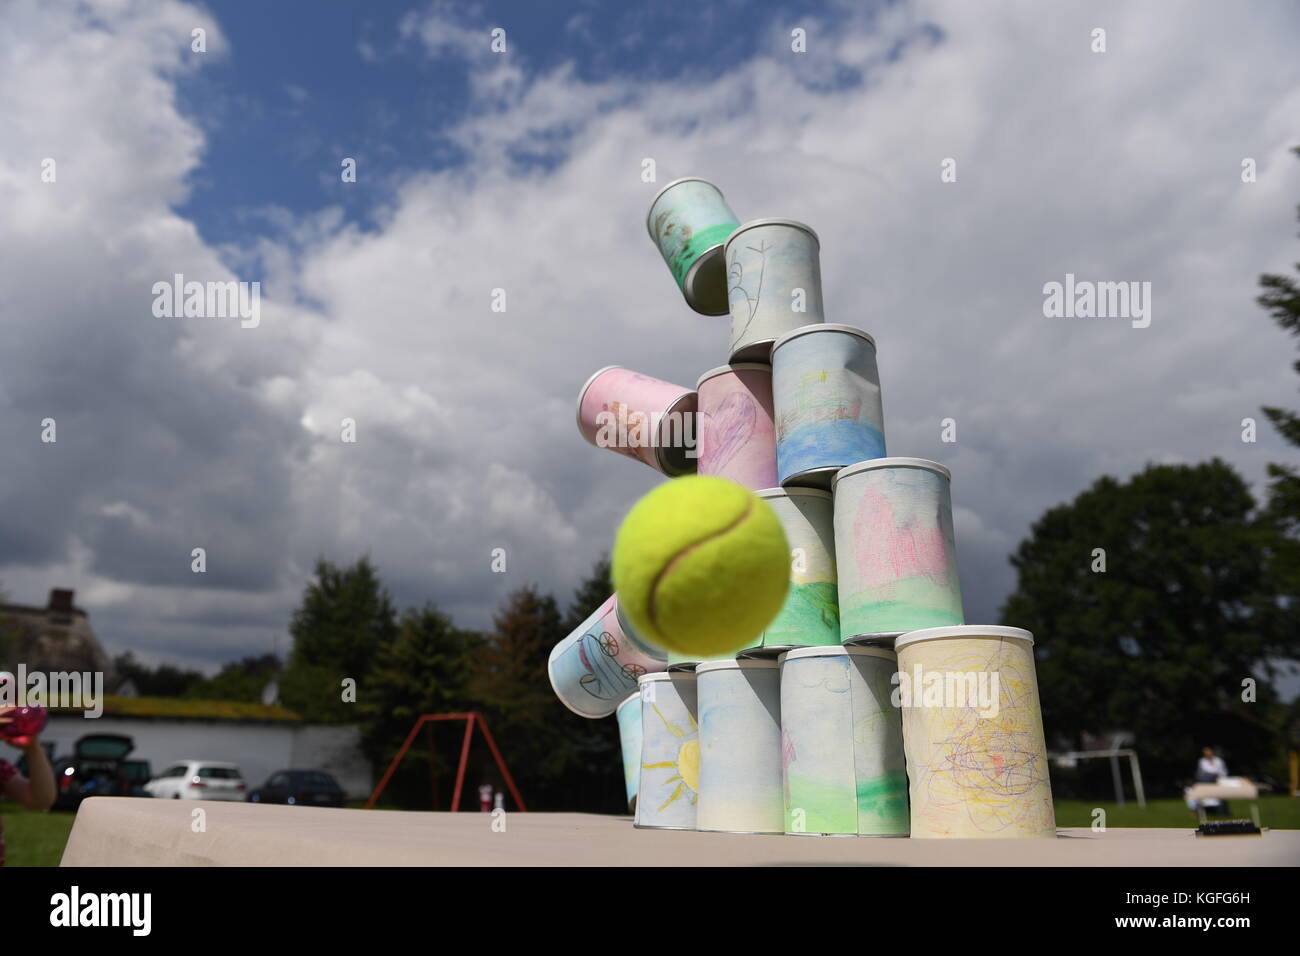 kids throwing a ball at cans Stock Photo